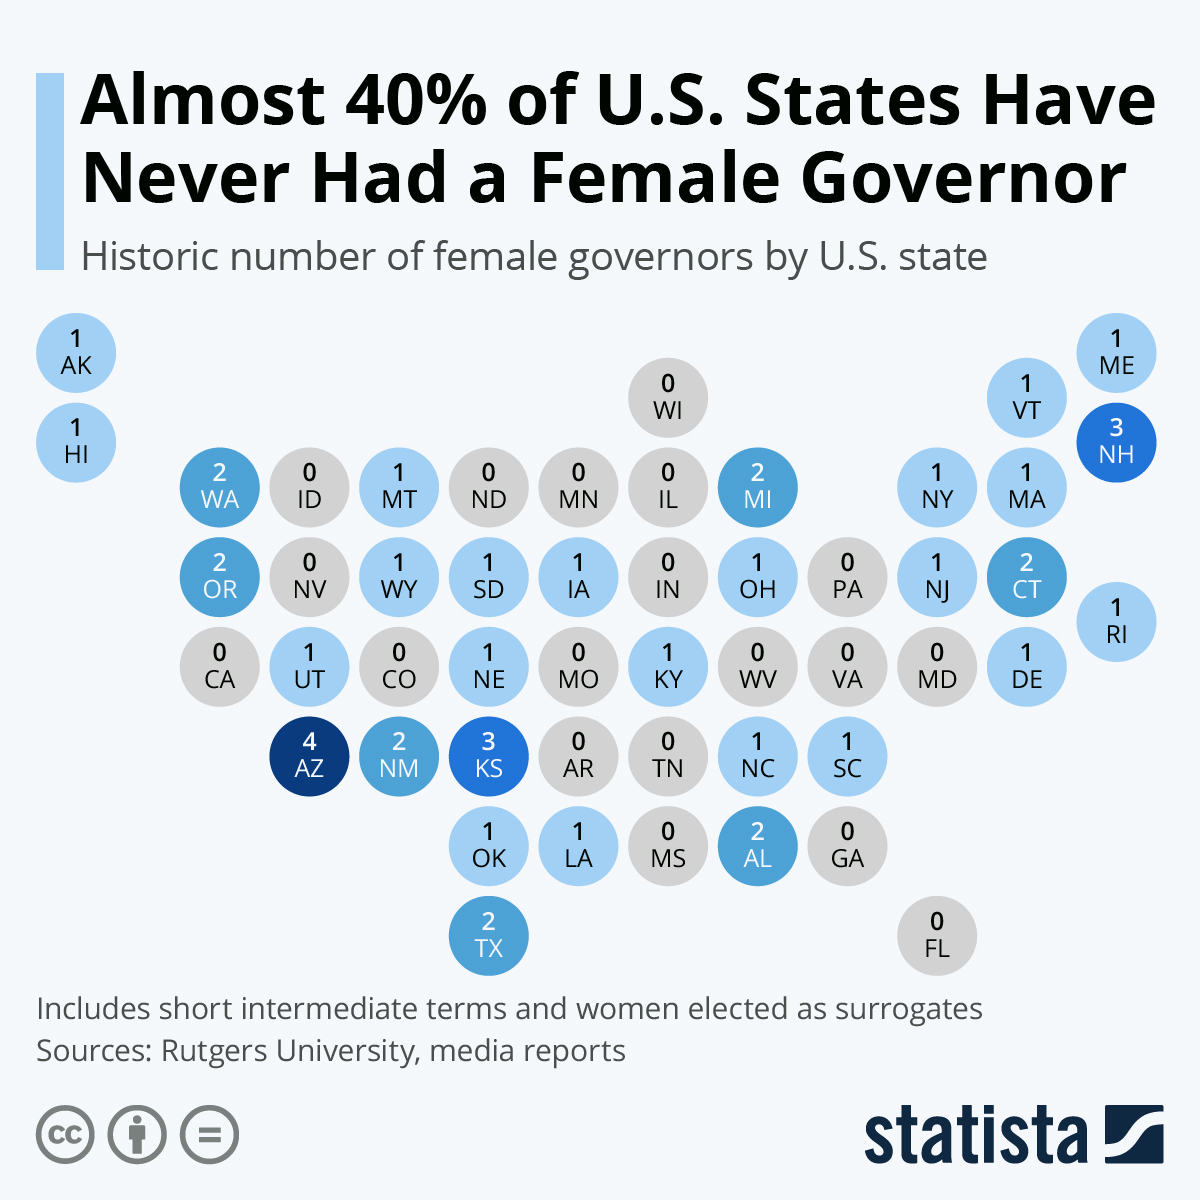 Female governors